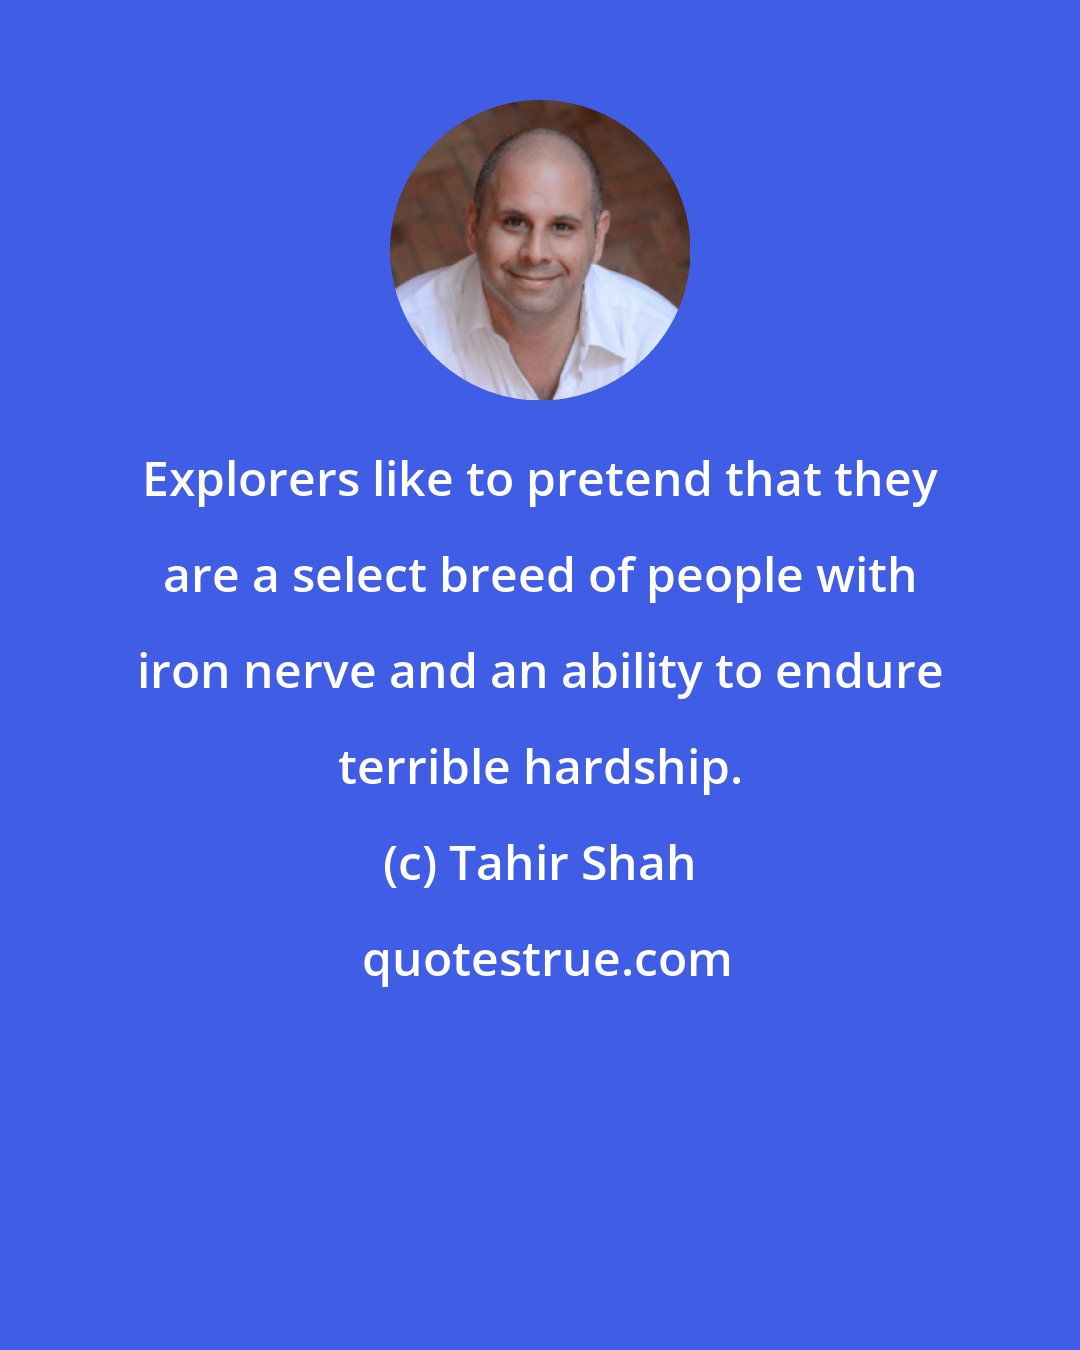 Tahir Shah: Explorers like to pretend that they are a select breed of people with iron nerve and an ability to endure terrible hardship.